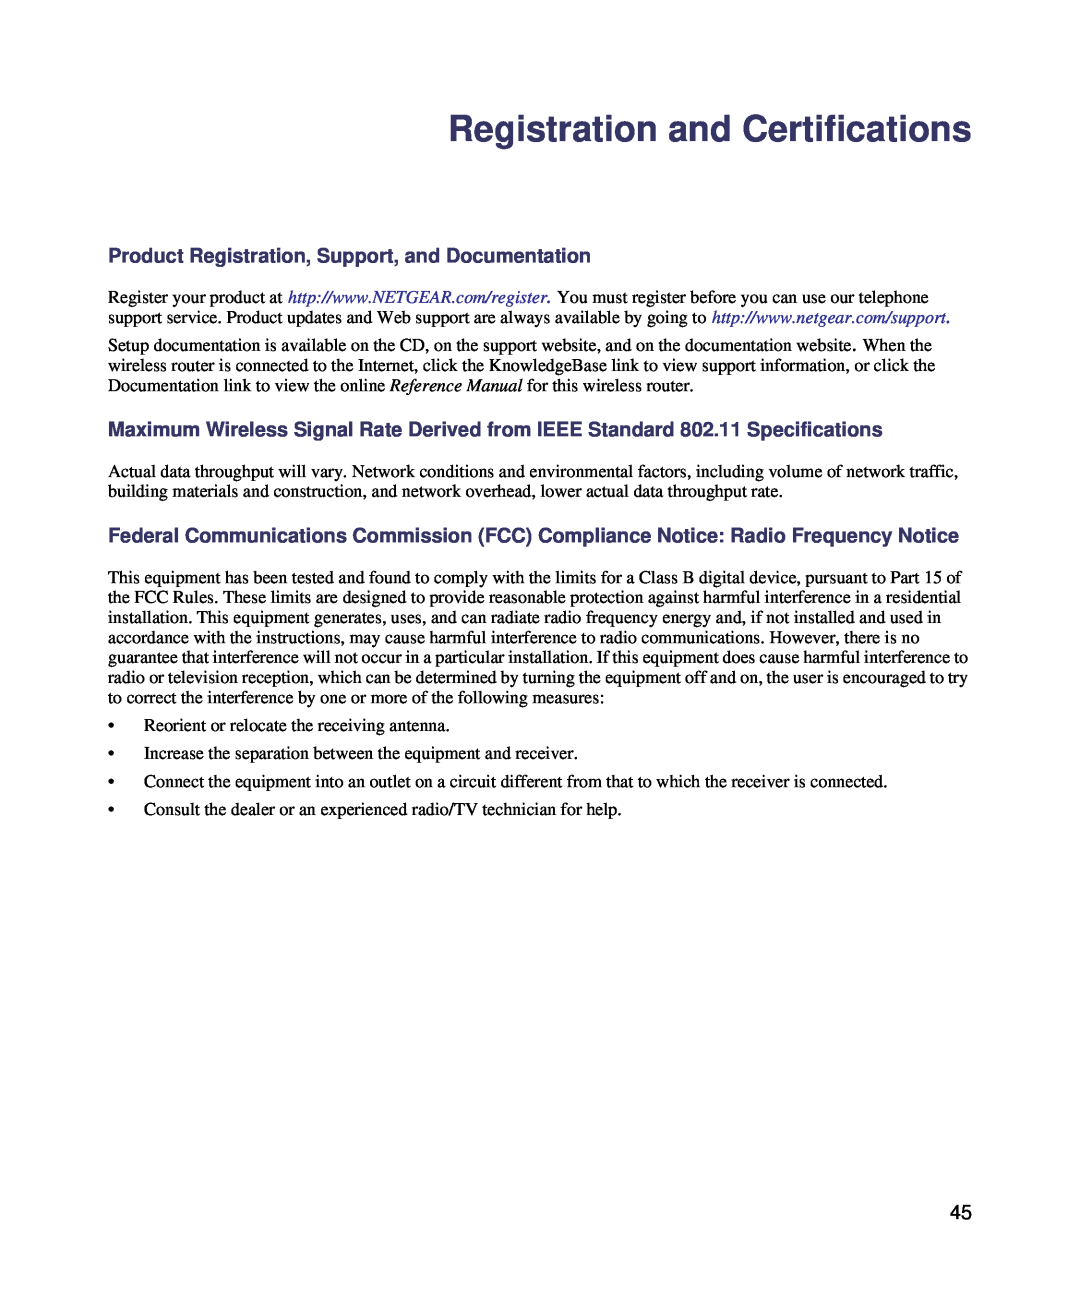 NETGEAR WNDR3400-100NAS manual Registration and Certifications, Product Registration, Support, and Documentation 